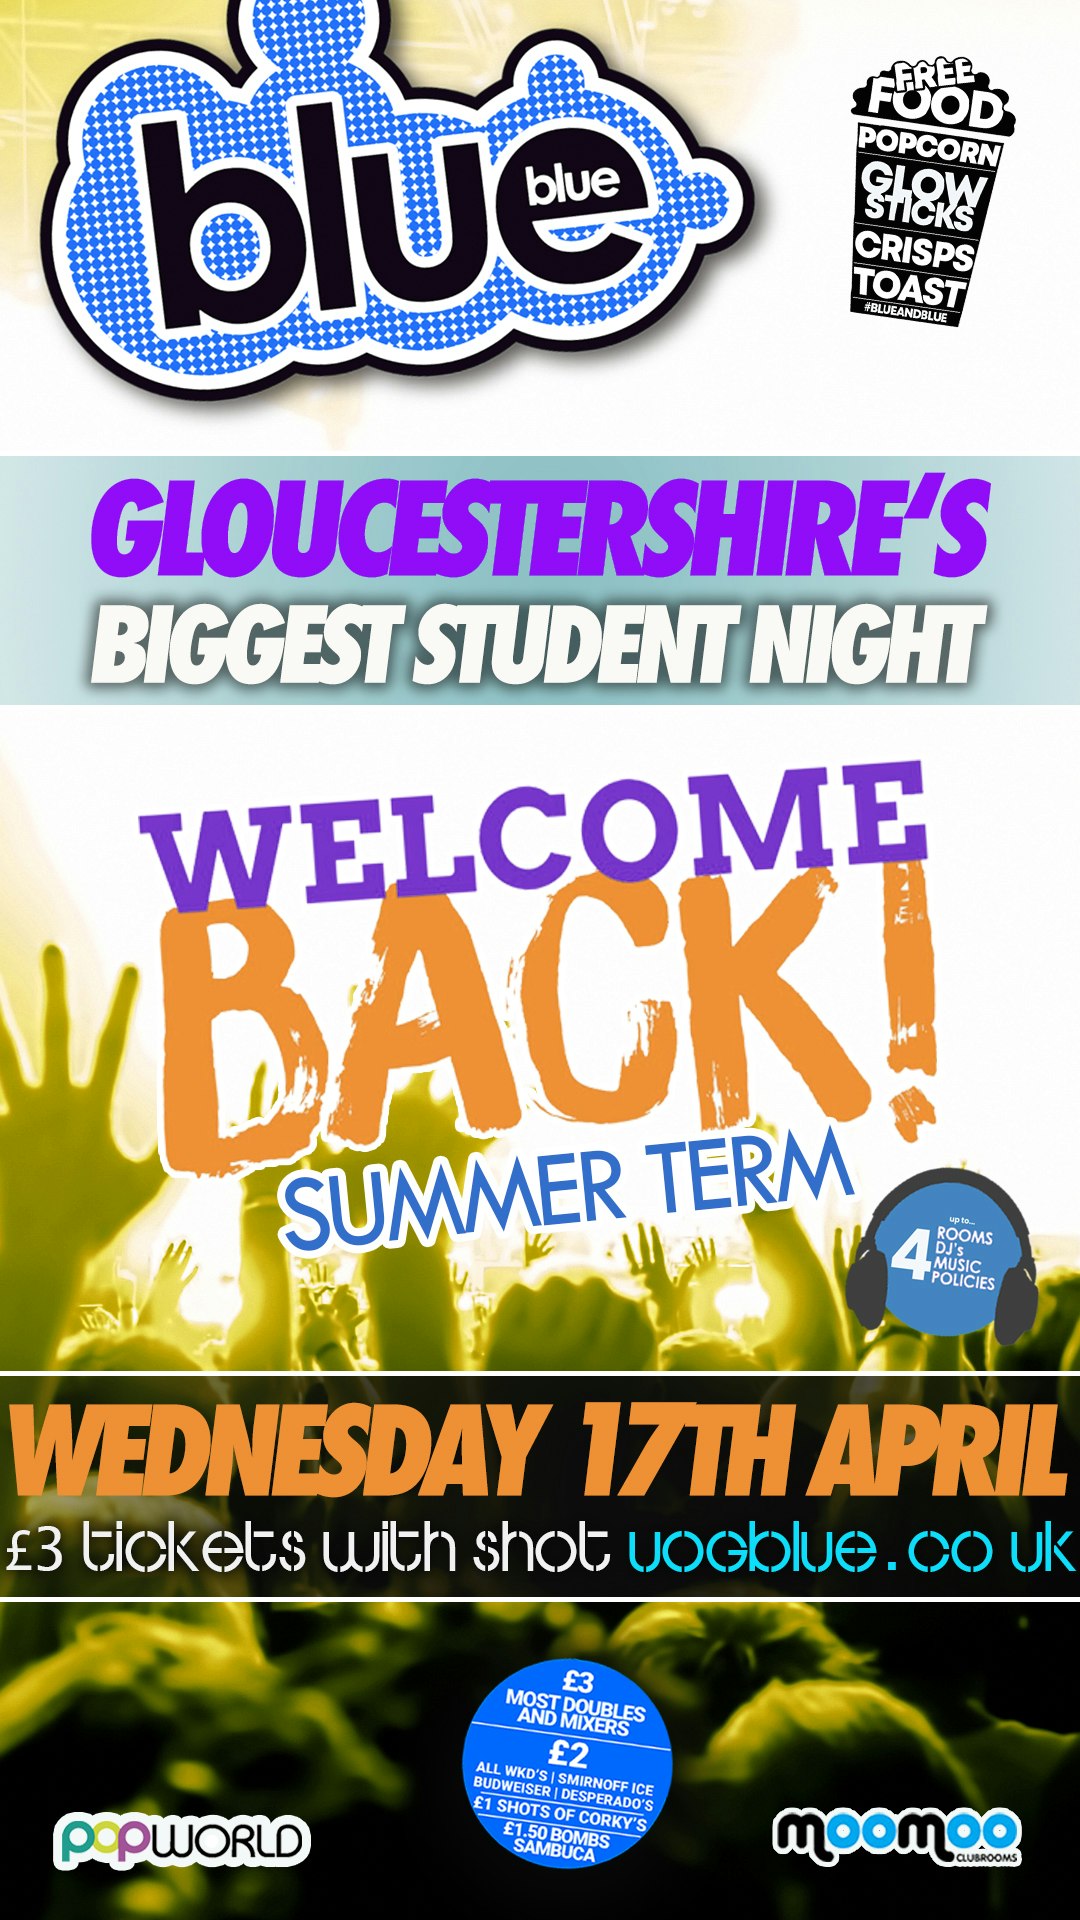 Blue and Blue – SUMMER TERM WELCOME BACK – Gloucestershire’s Biggest Student Night